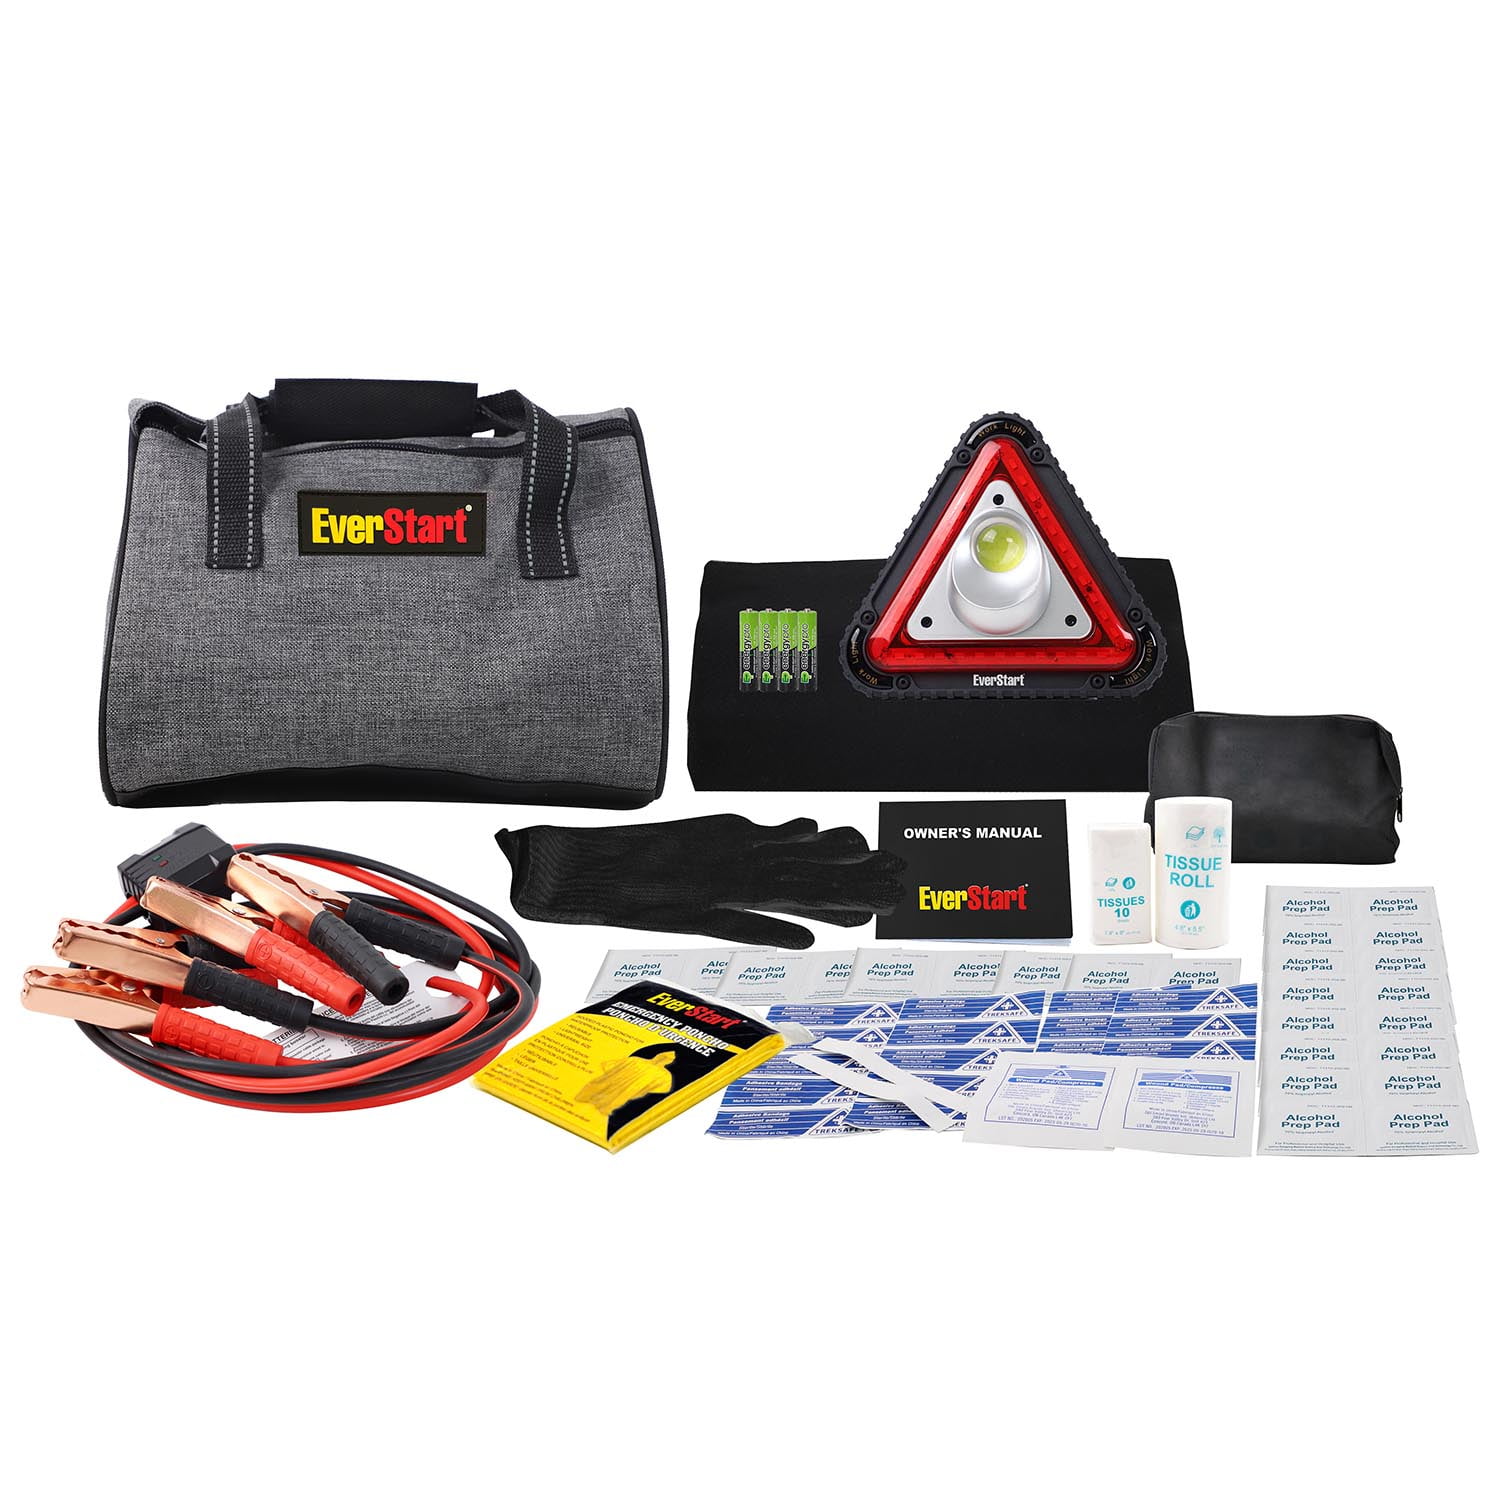 EverStart Road Trip Safety Kit with Booster Cables